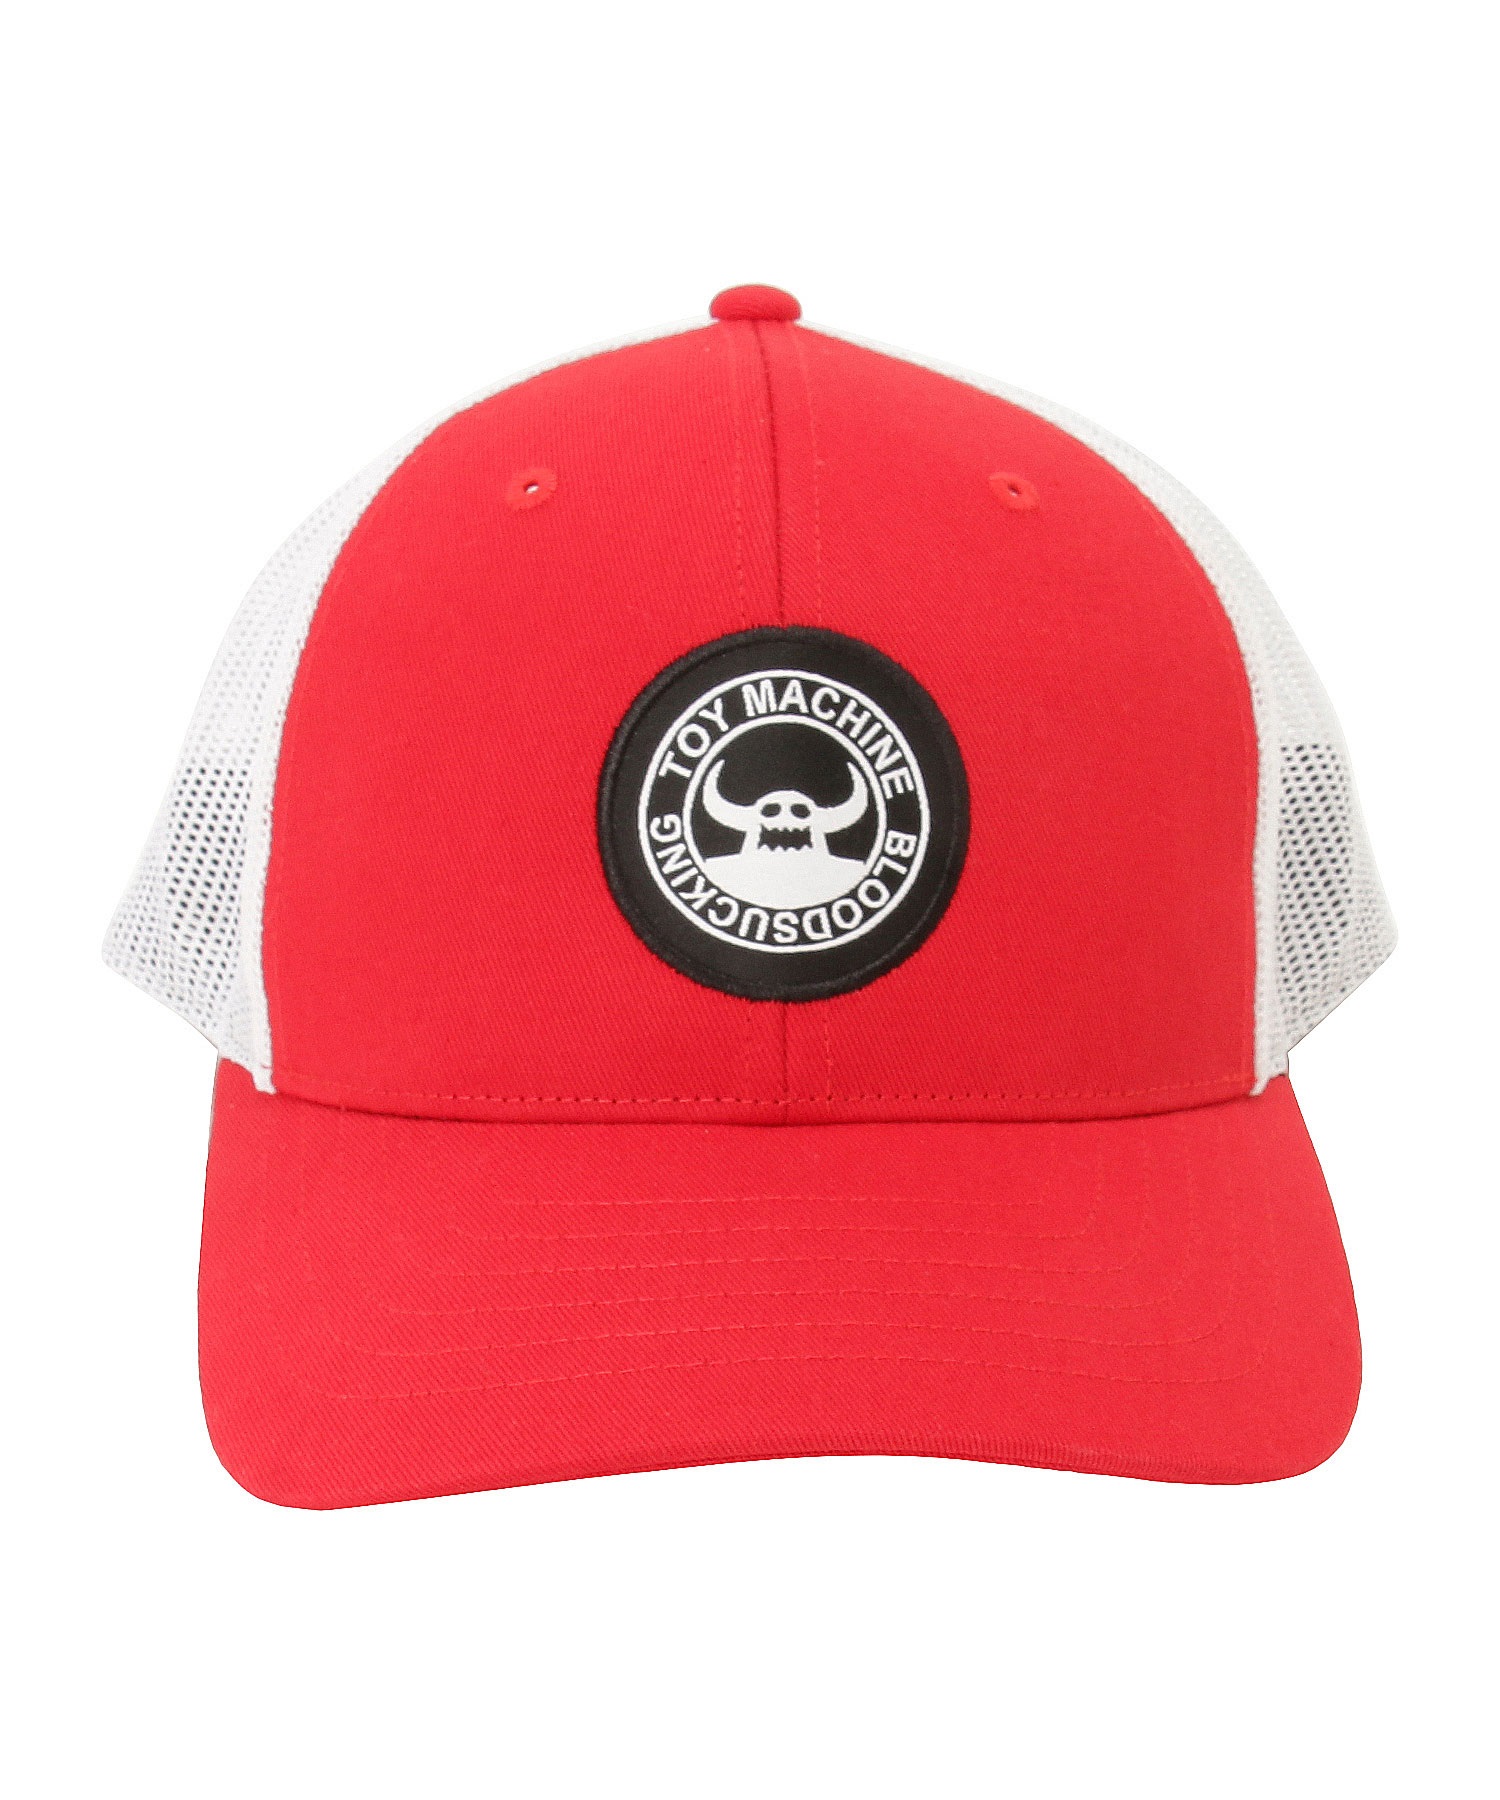 TOY MACHINE/トイマシーン キッズ キャップ TOY COTTON TWILL MESH CAP 232045002(RD-ONESIZE)